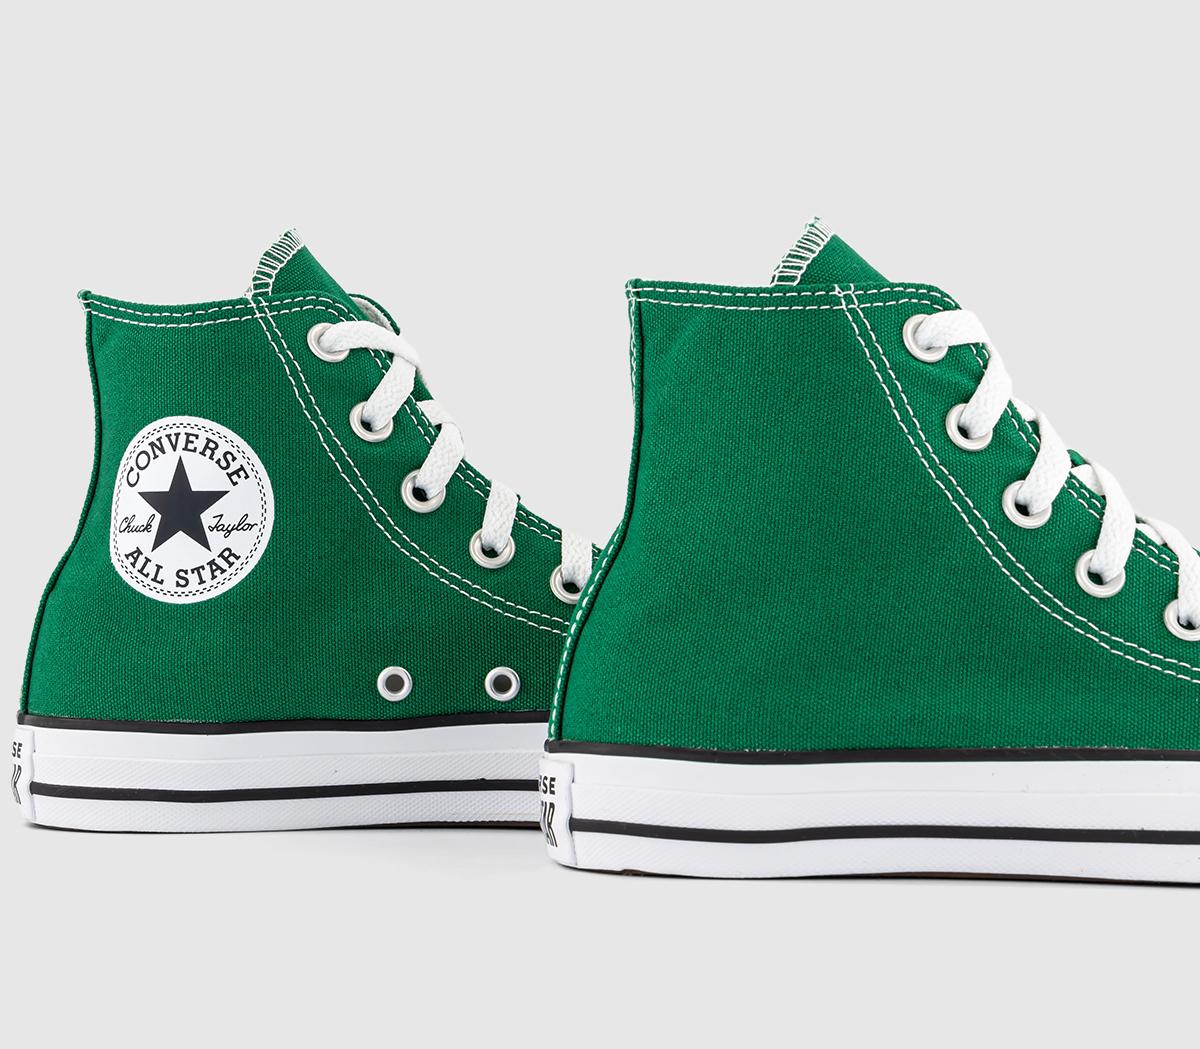 Converse Converse All Star Hi Trainers Amazon Green - Men's Trainers